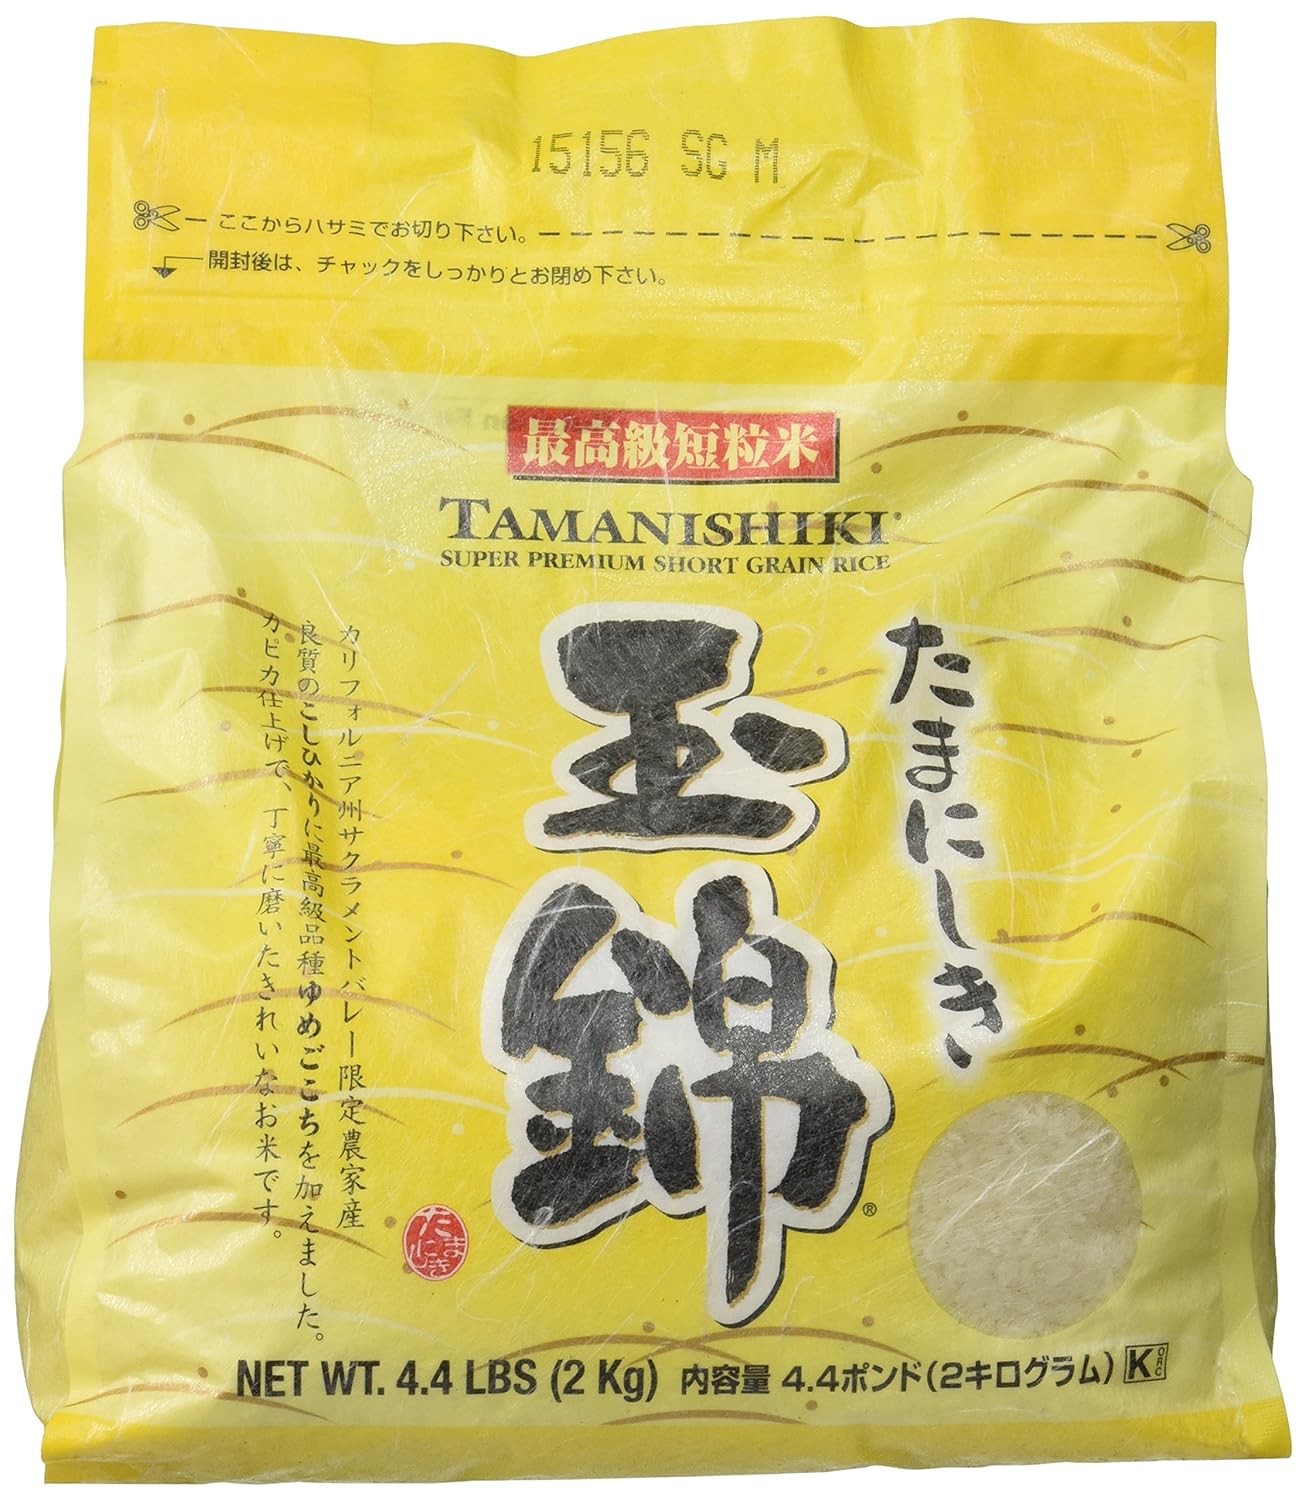 I cant always get to the asian market for all my short grain rice needs, so i turned to amazon as one does. Im impressed. The flavor and texture is better than the pricier rice i was paying for. I plan on reordering, hopefully a bigger bag. I went to mitsuwa a week later and they had it there as well if you want to feel authentic haha.